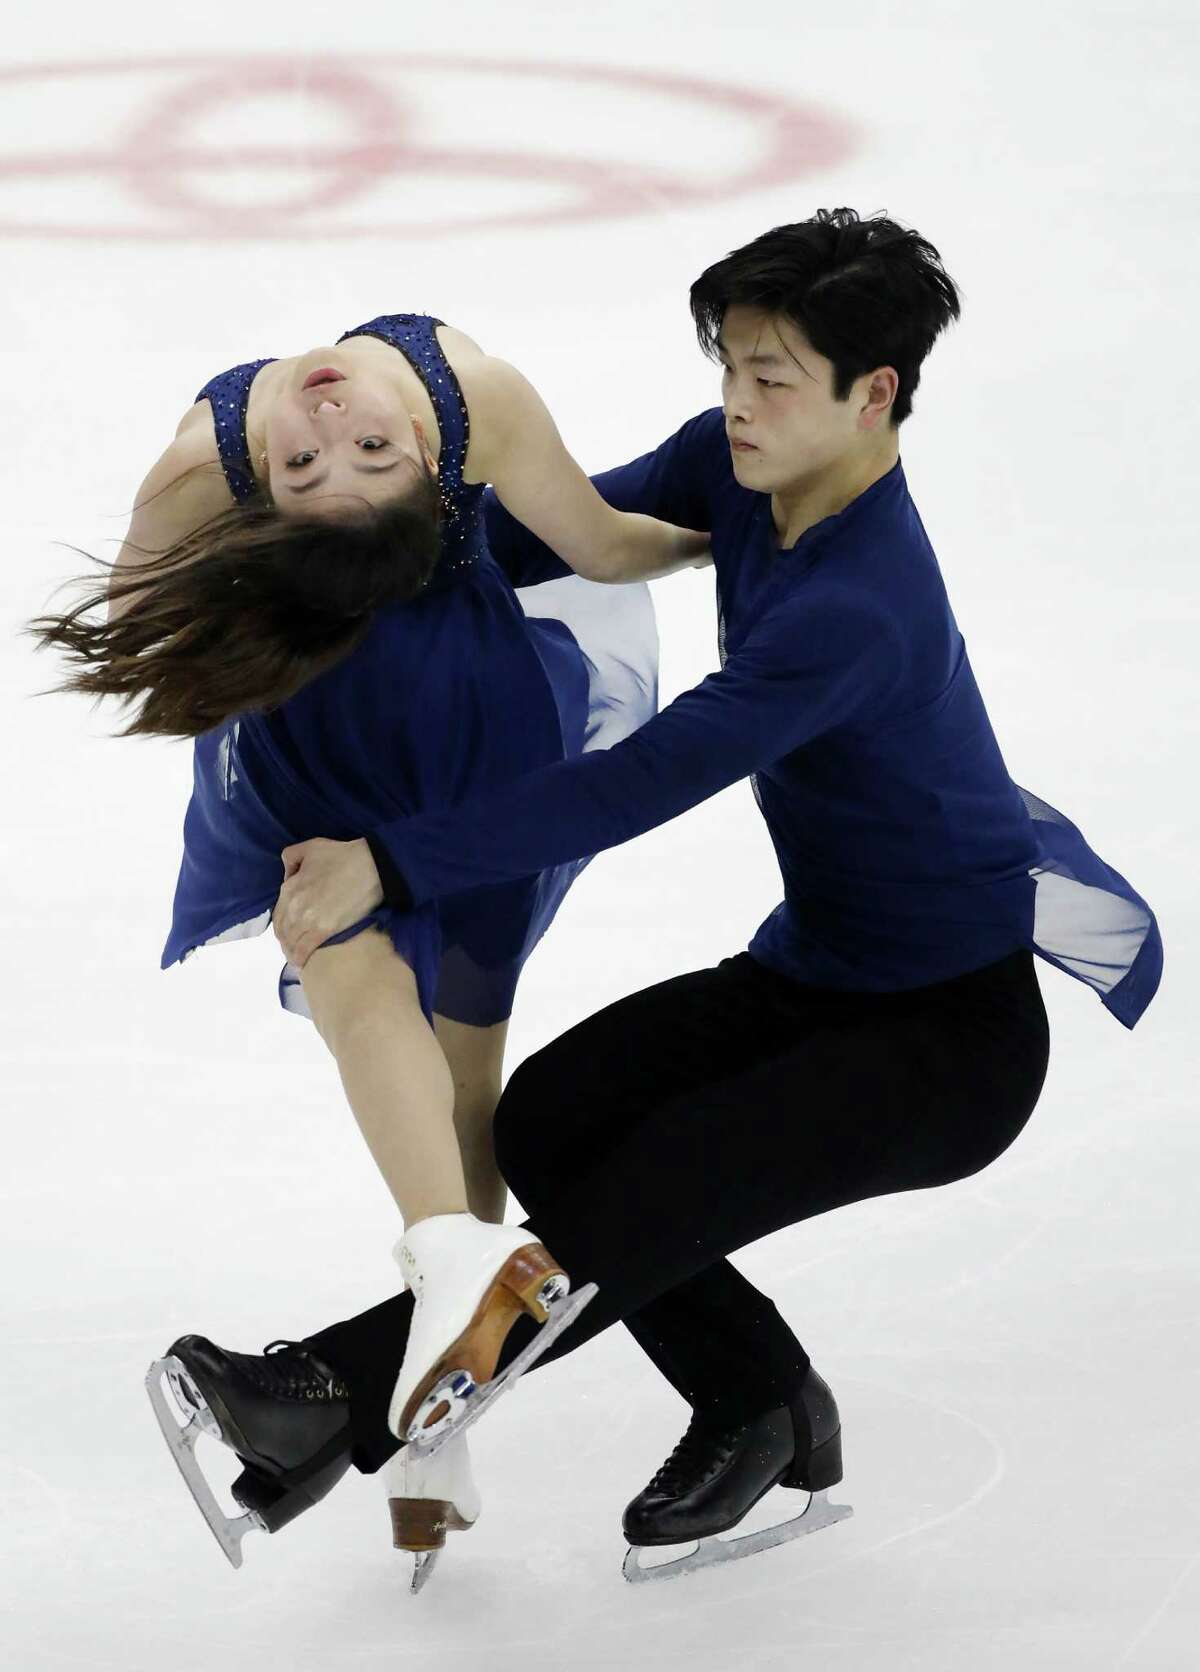 Maia and Alex Shibutani perform during the free dance competition at the U.S. Figure Skating Championships Saturday, Jan. 21, 2017, in Kansas City, Mo. (AP Photo/Colin E. Braley)